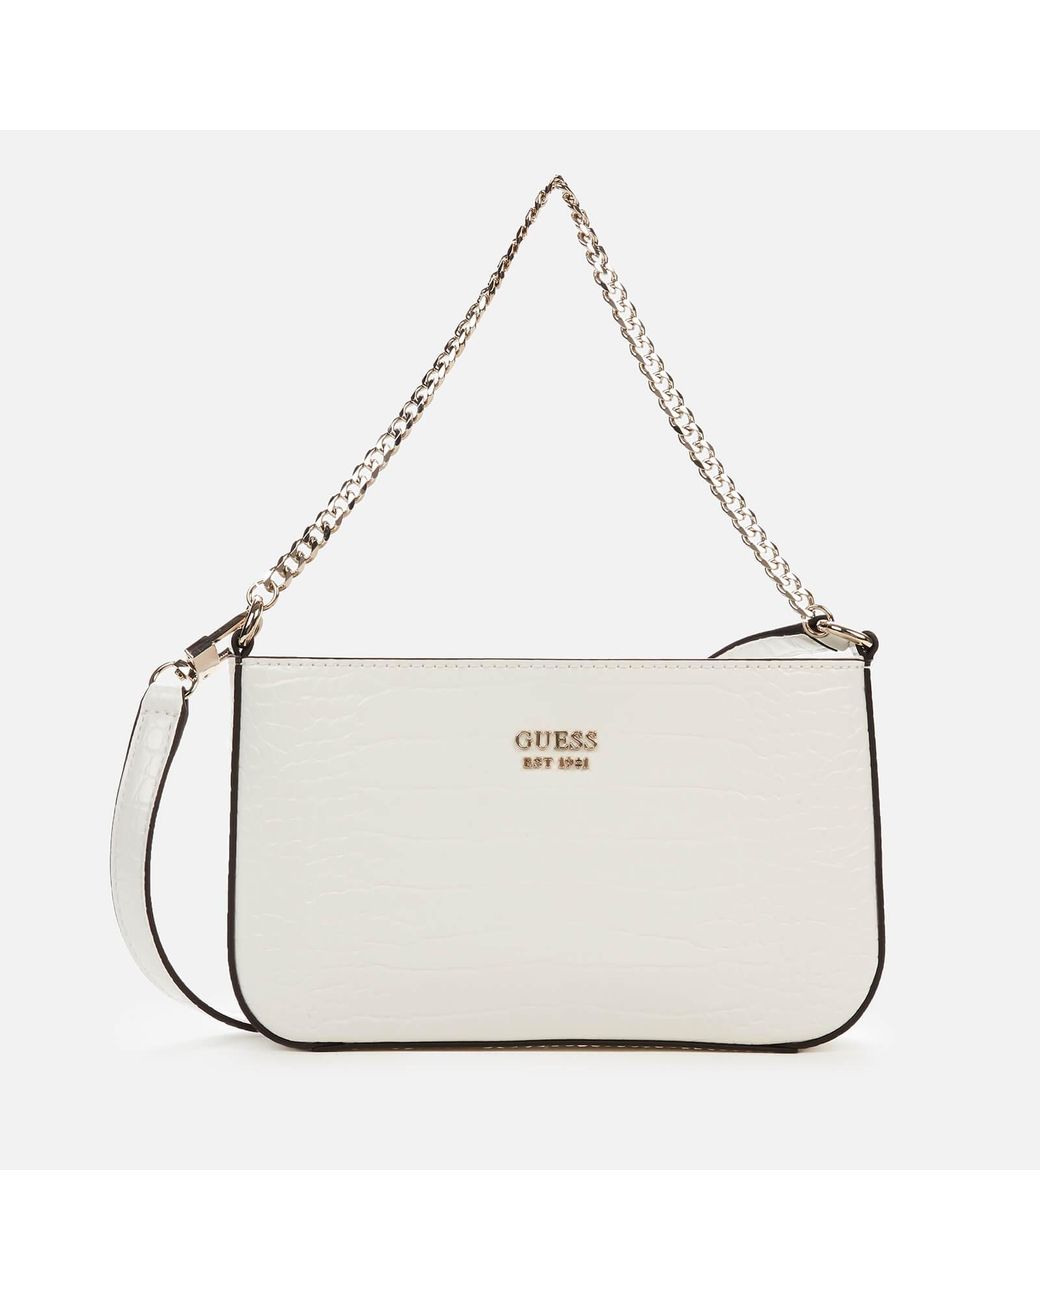 Guess Katey Mini Top Zip Shoulder Bag in White | Lyst